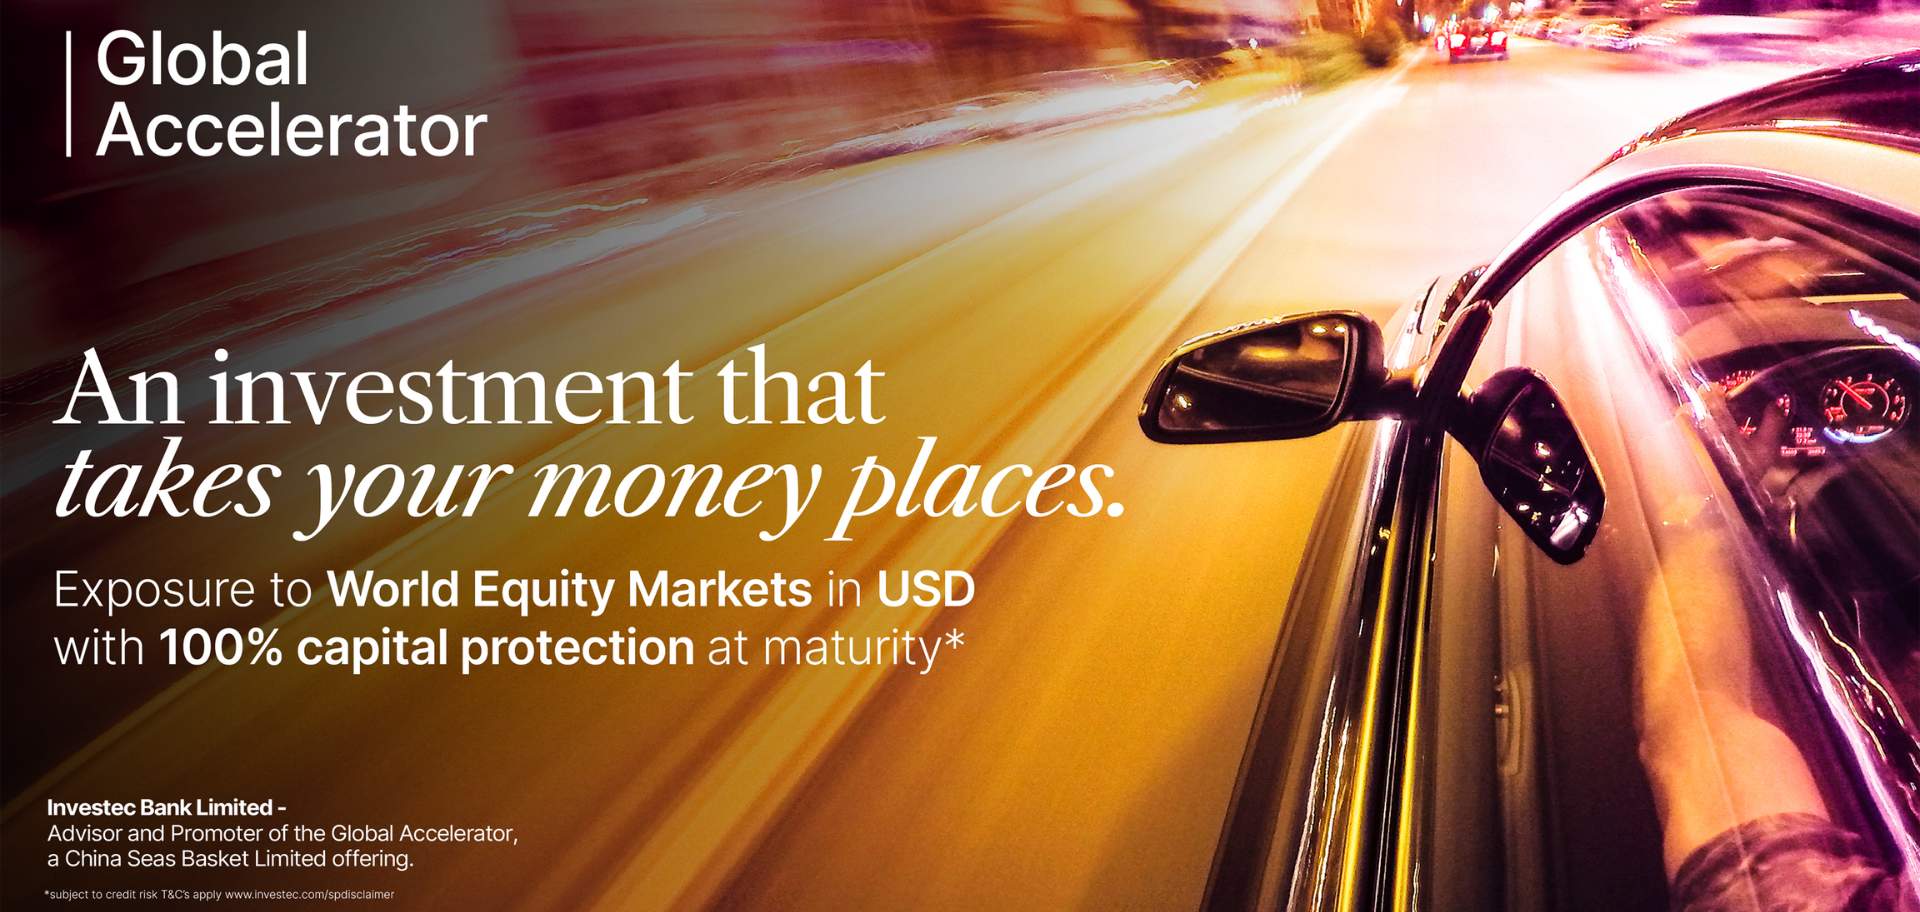 Structured products can play a key role given the world’s demographic shift